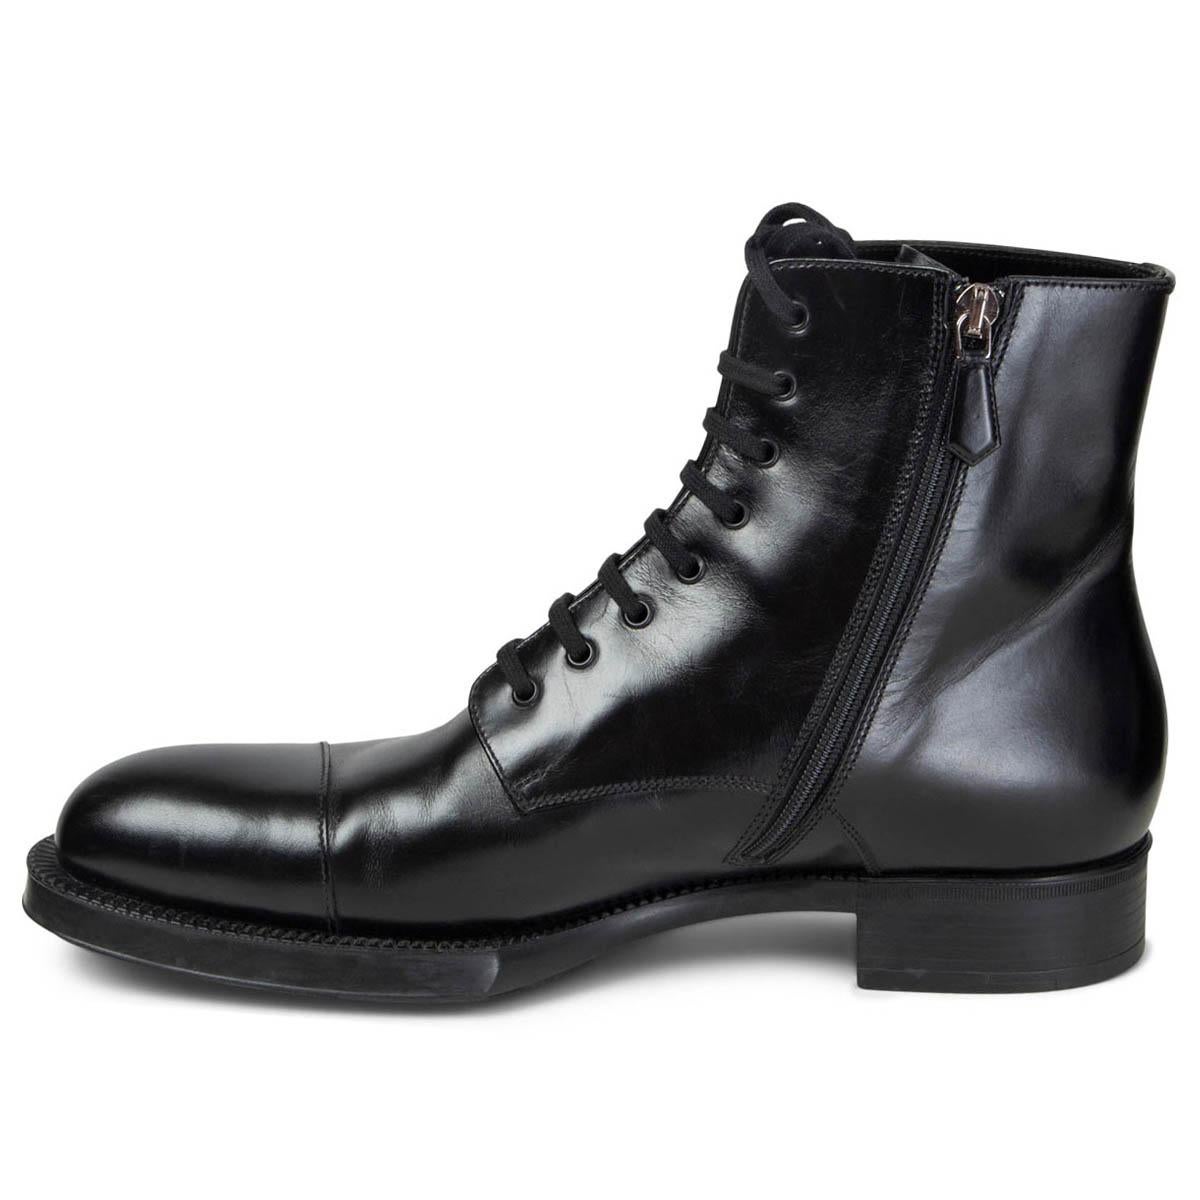 Black PRADA black leather LACE-UP Ankle Boots Shoes 40 For Sale